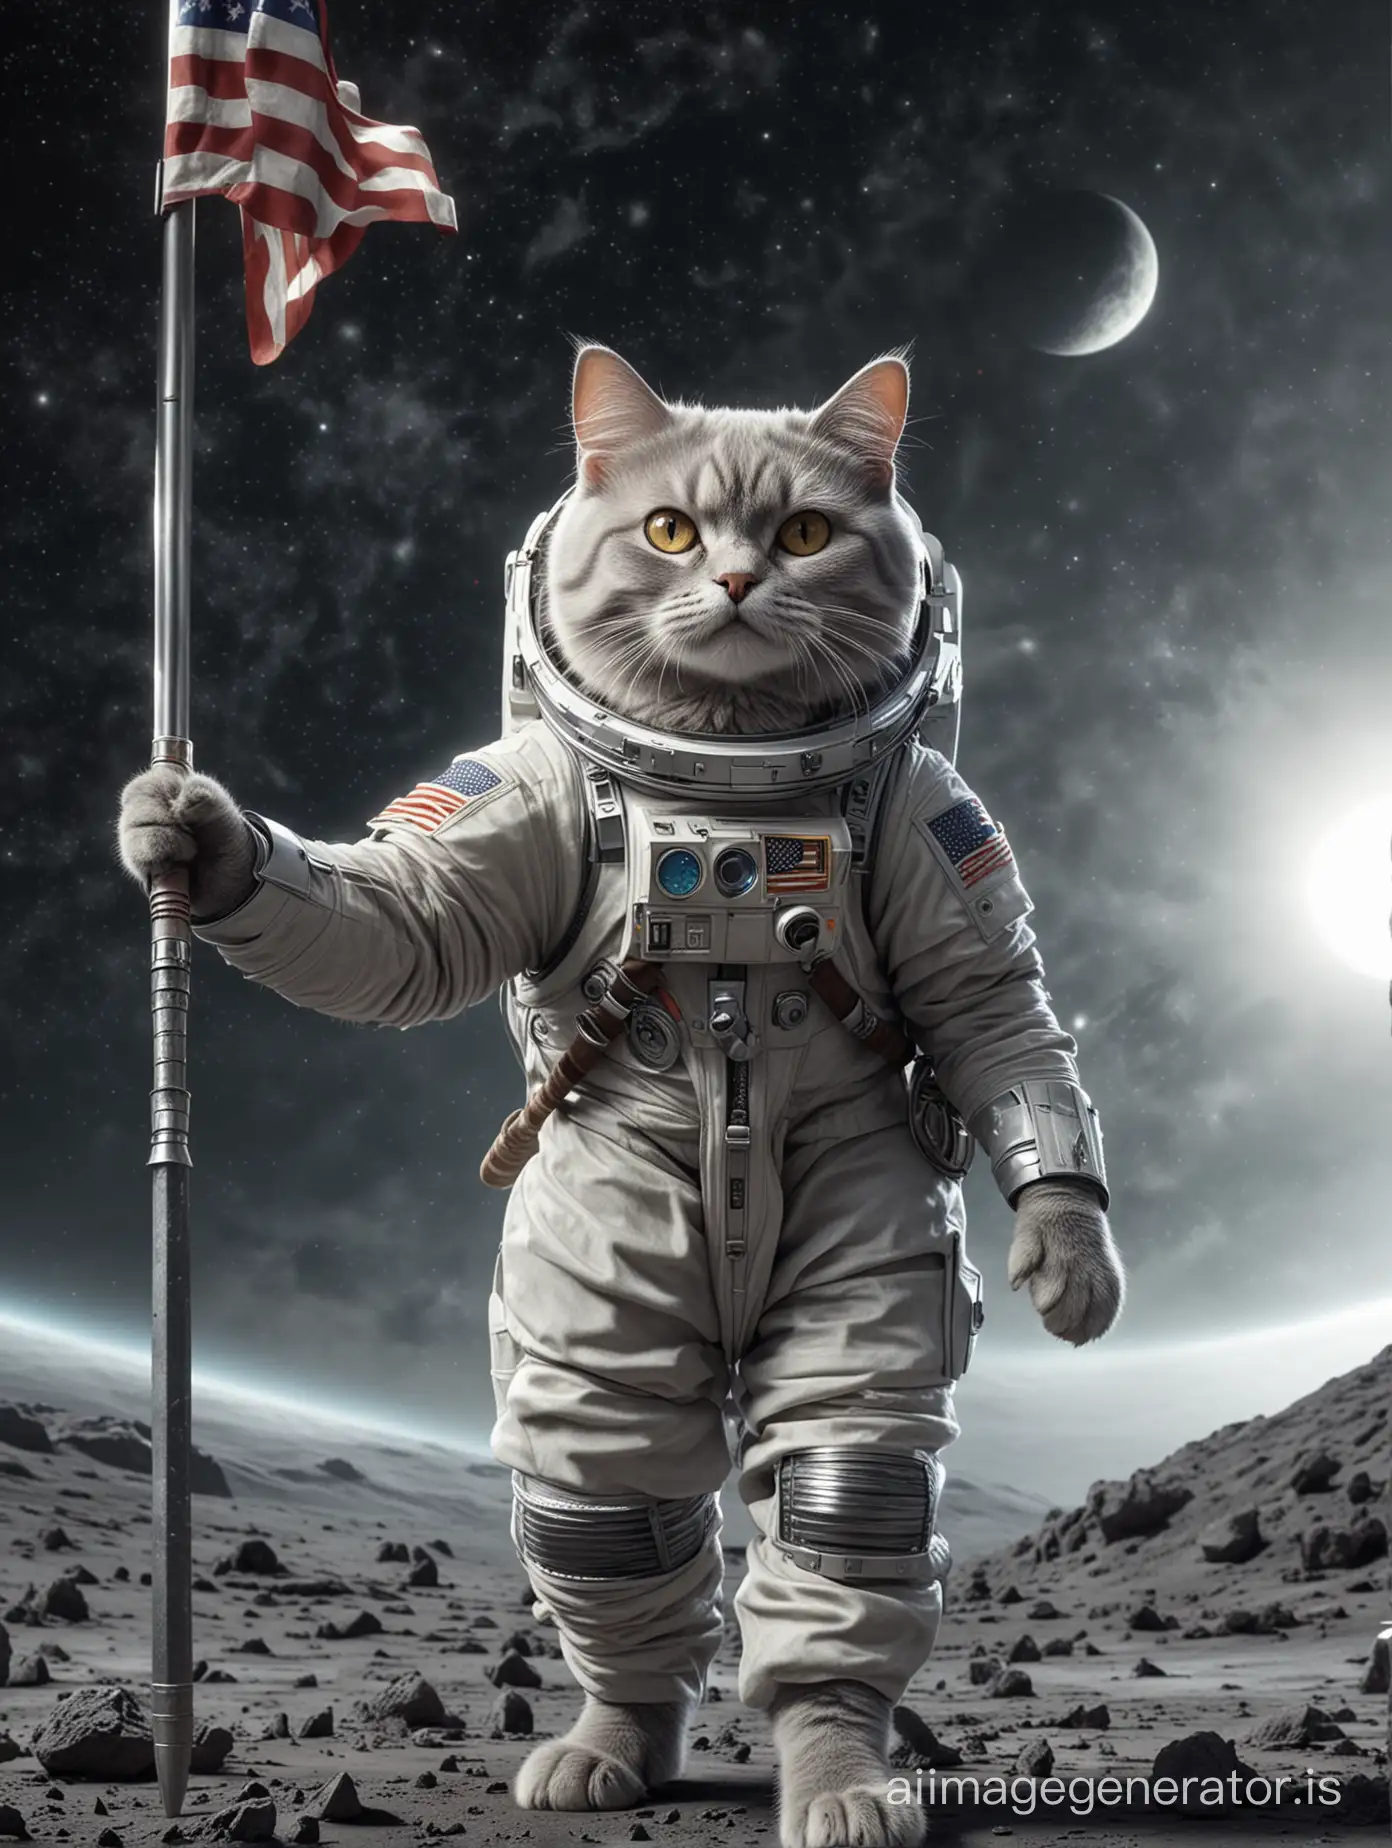 4k, ultra resolution, hd, realistic. Neill Armstrong style light grey cat with grey eyes in spacesuit raising an one flag on the moon ground in space with Jedi sword in hand